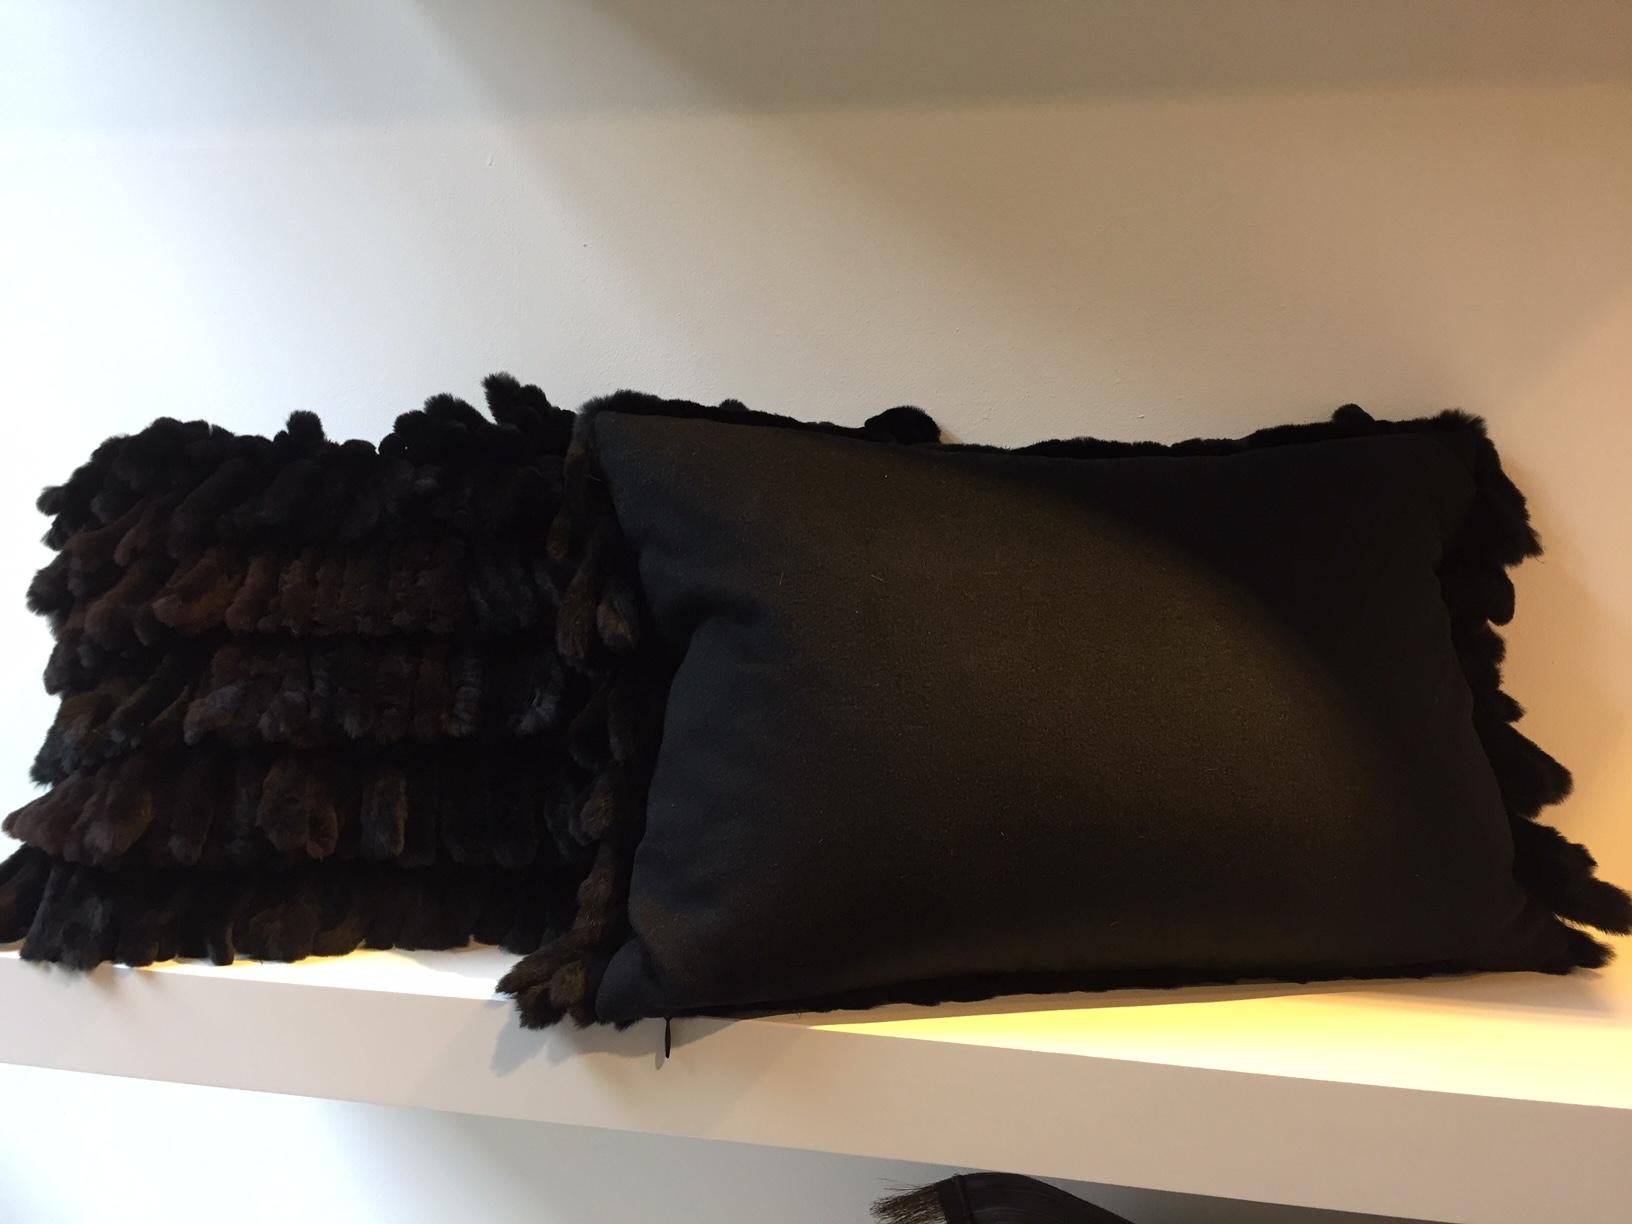 1 Pair Mink Cushions Color Black-Brown With Black Cashmere On the Back ,
Fringes are sawn in tubes,
Size 30x45cm 
Showroom Sample